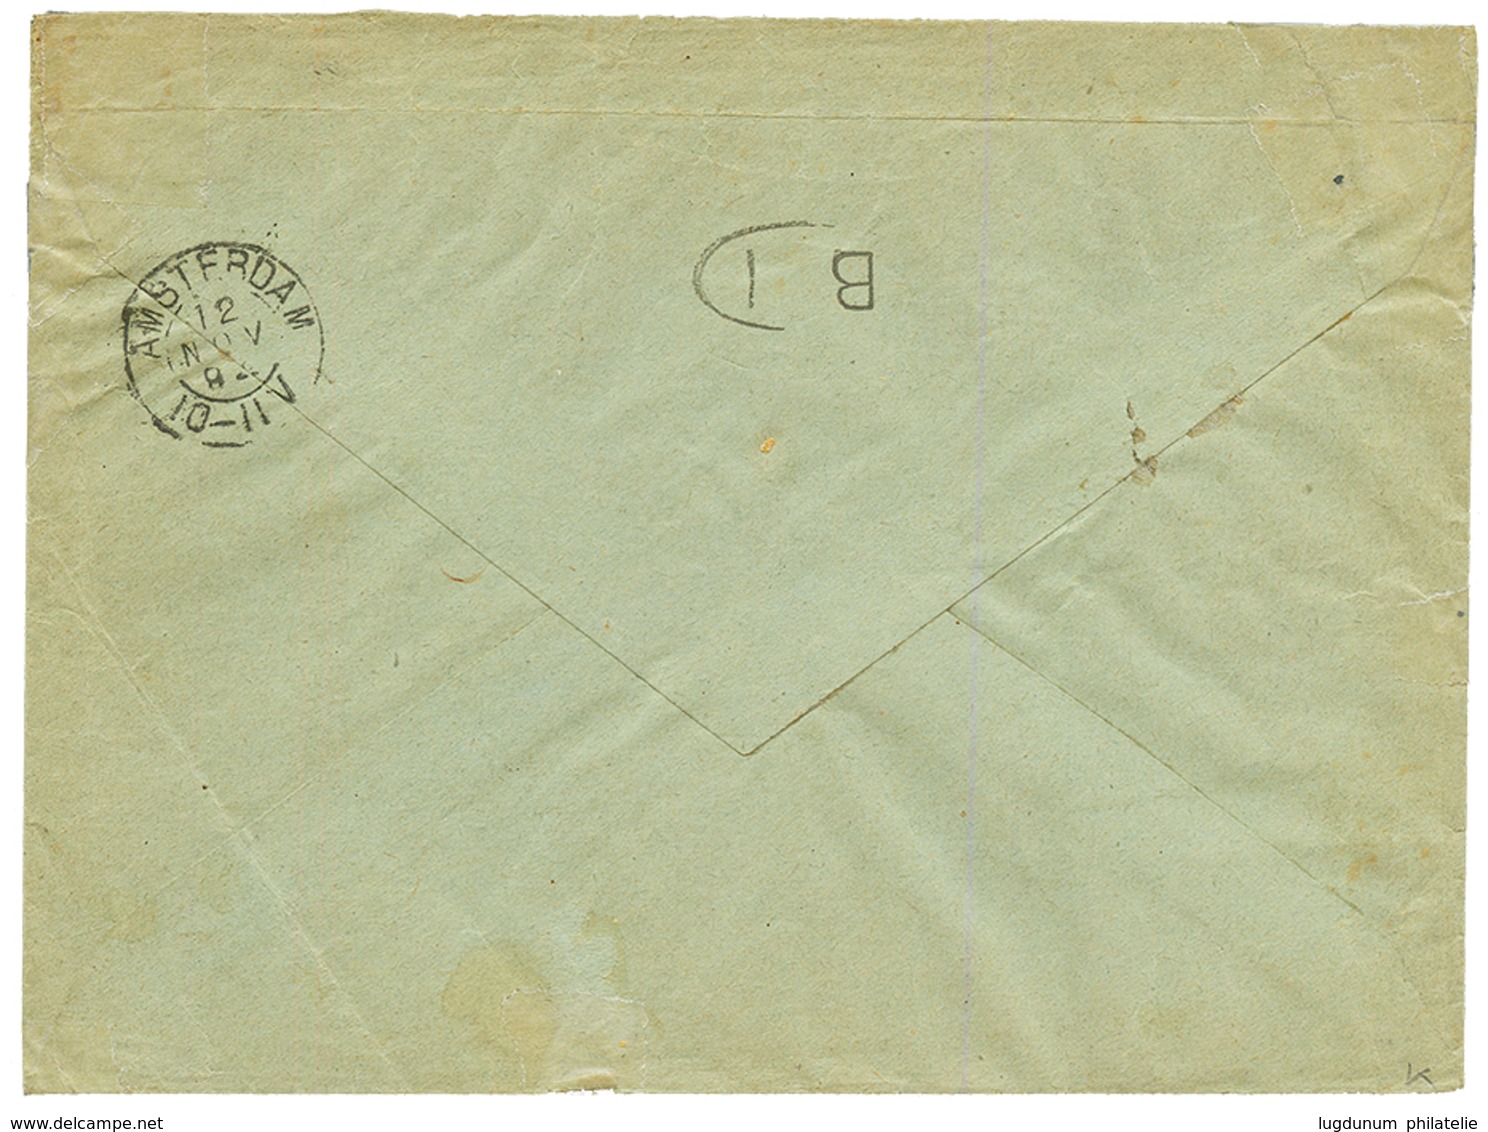 SURINAME : 1894 1cx3(1 Stamp With Fault) + 12 1/2c + 5c Unperf (!) Canc. NEDERL. PAKETBOOT On Cover To AMLSTERDAM. Vf. - Suriname ... - 1975